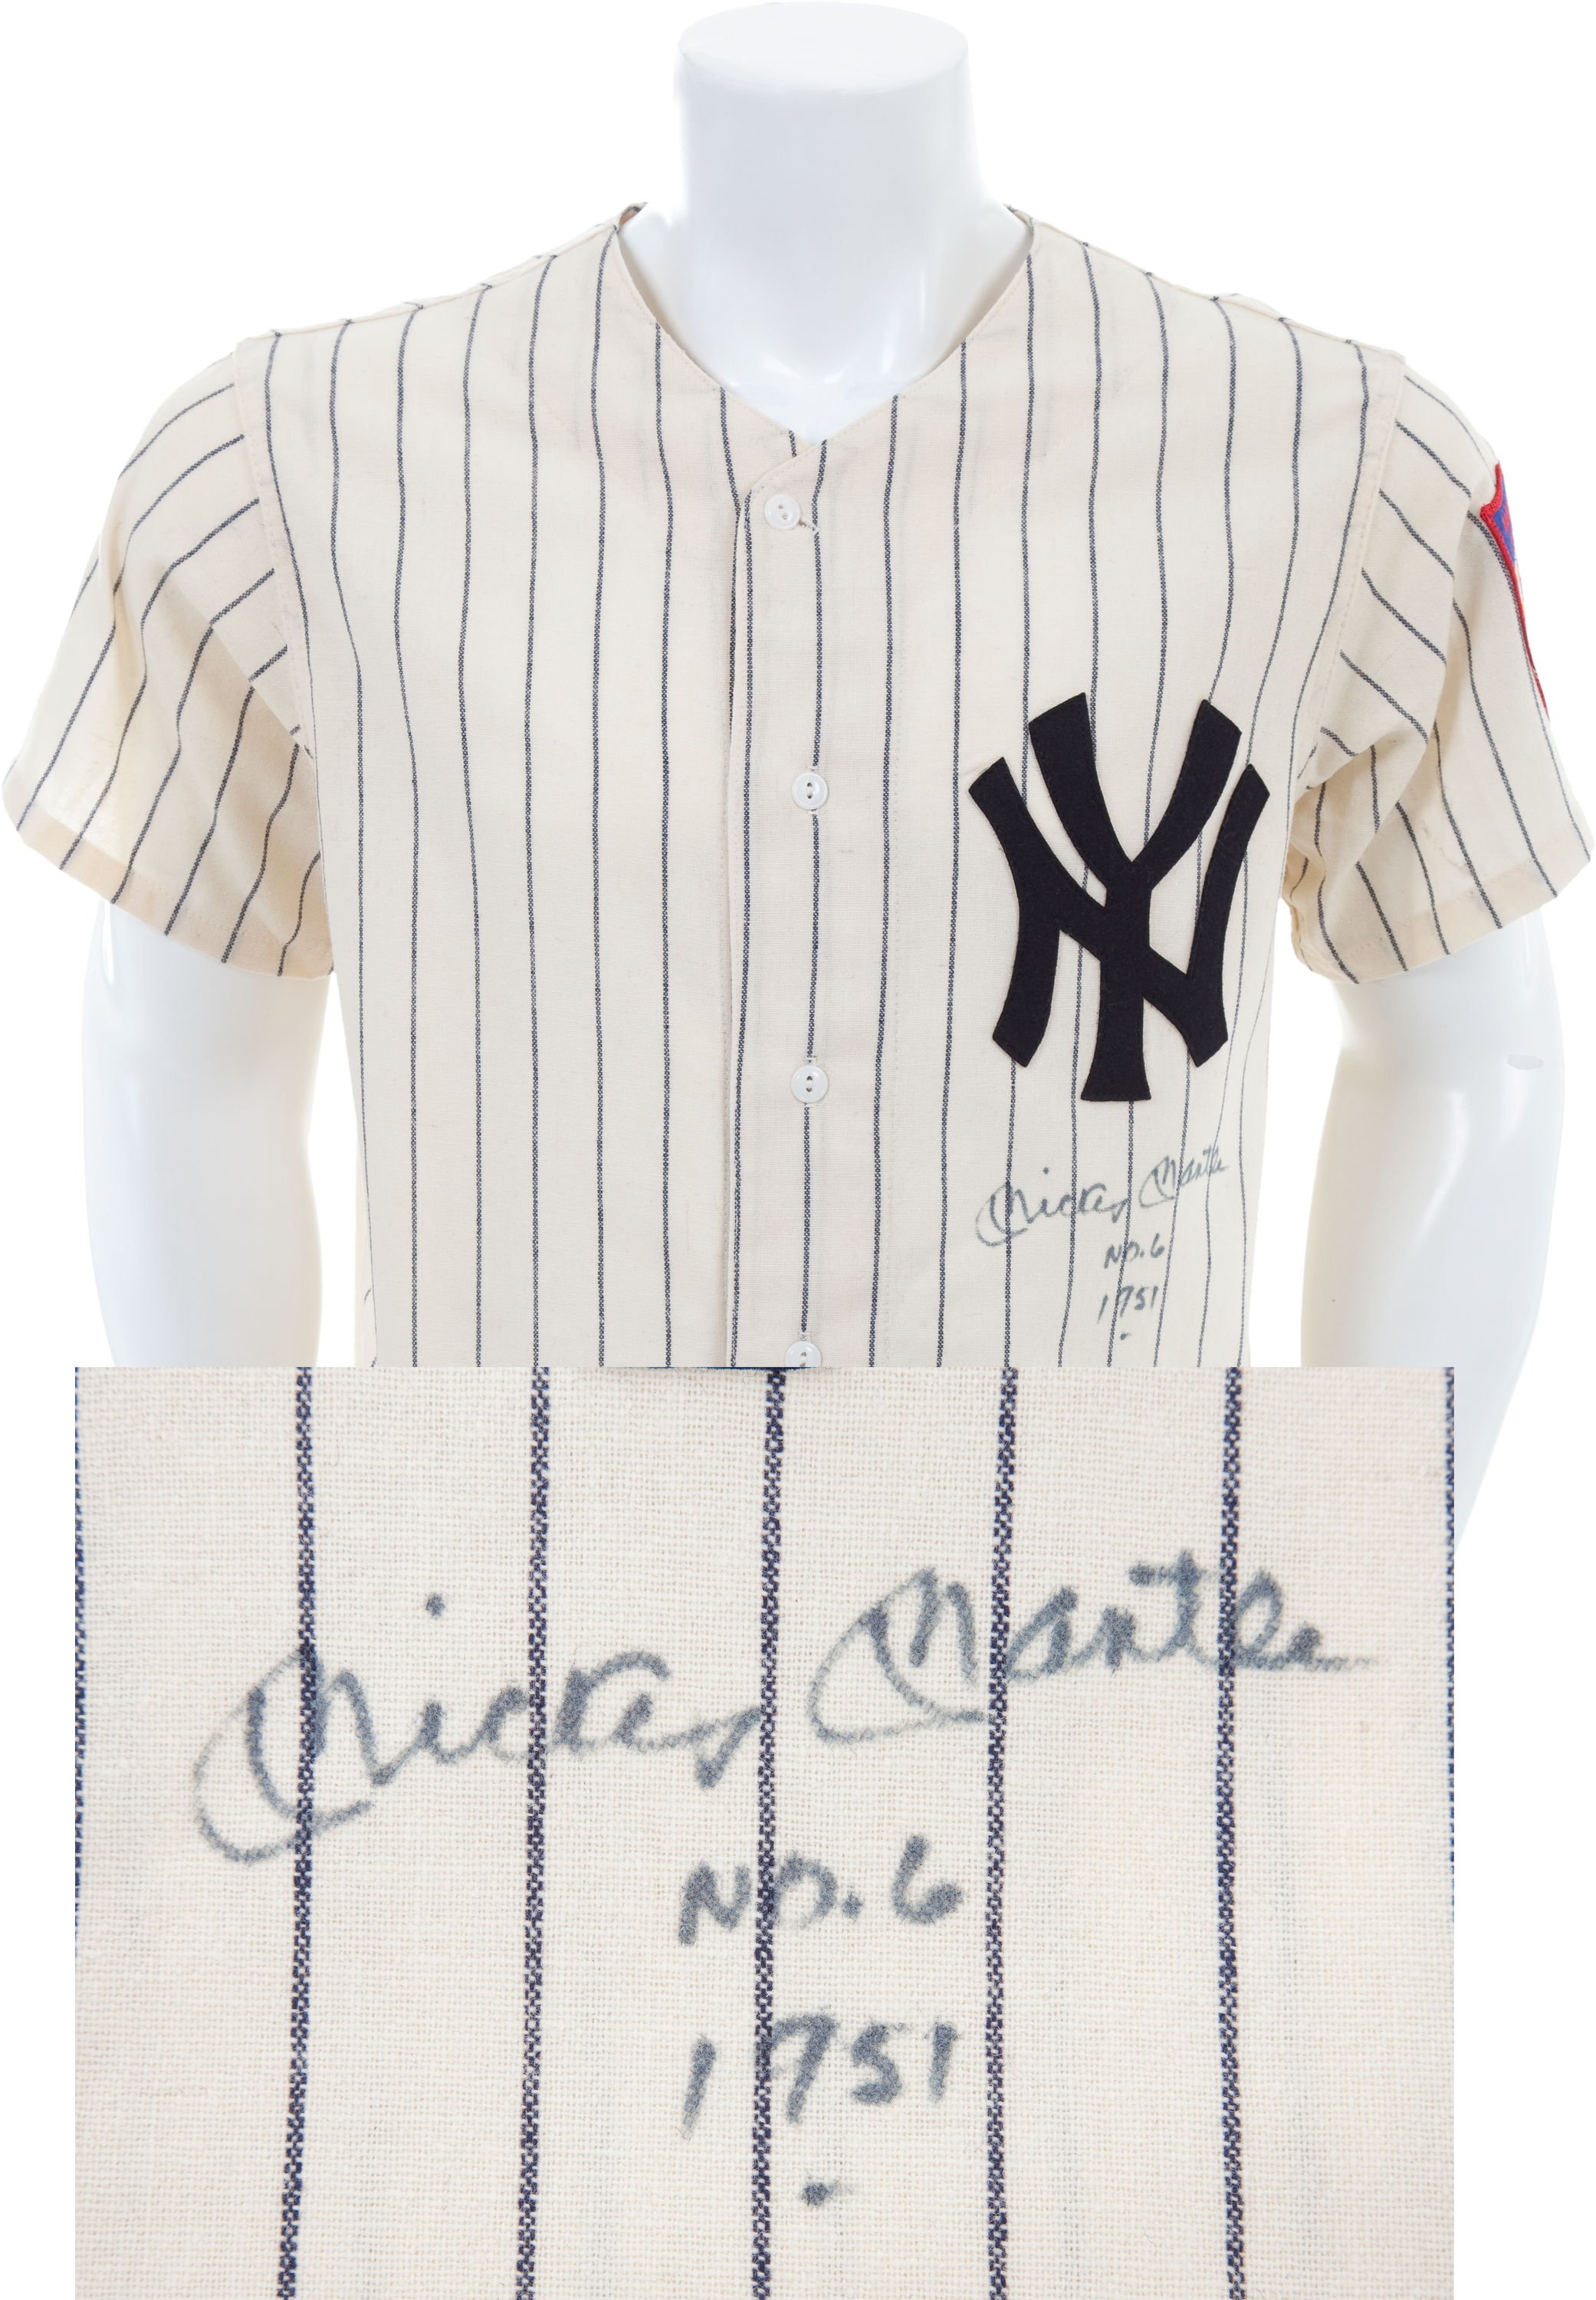 Autographed Mickey Mantle jersey